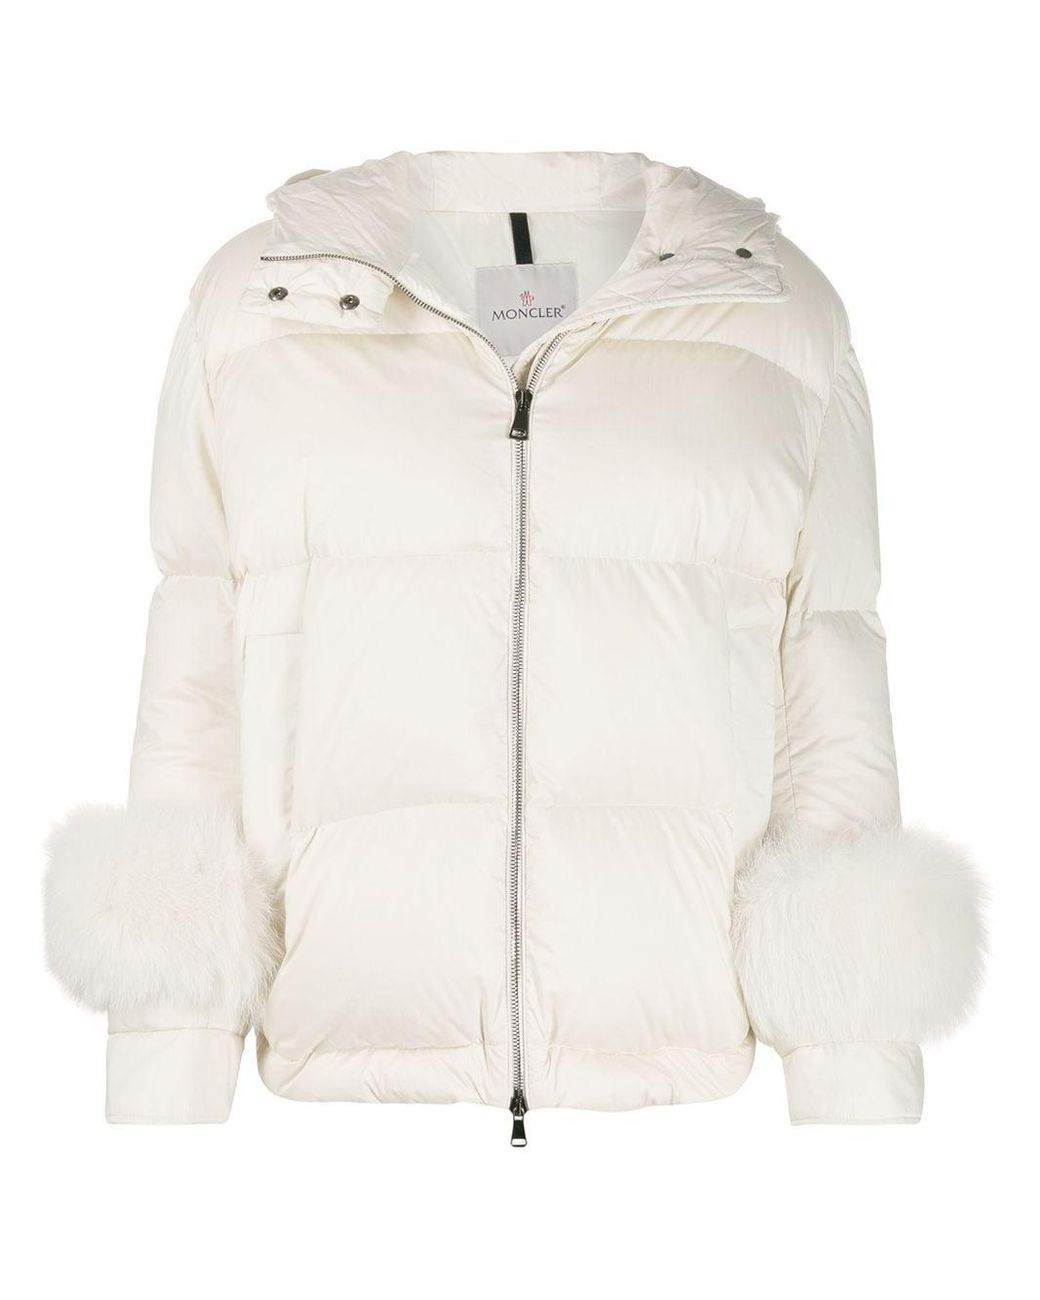 moncler feathers